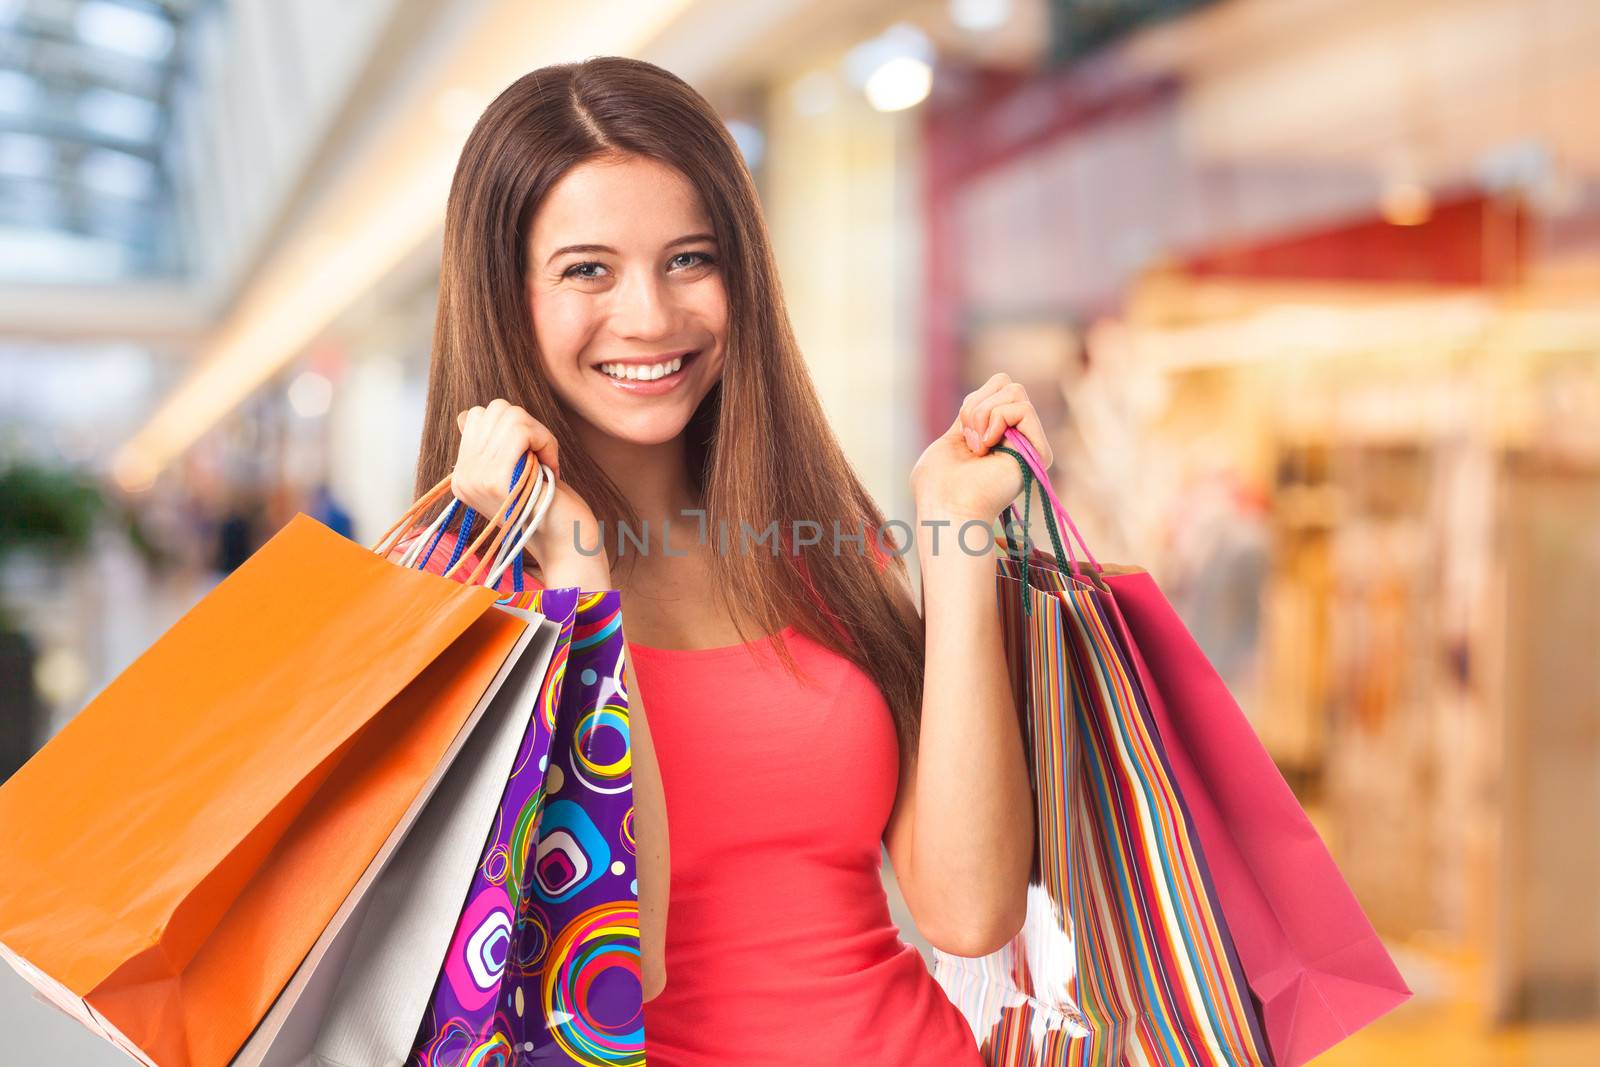 Portrait of a pretty young woman holding shopping bags in a supermarket